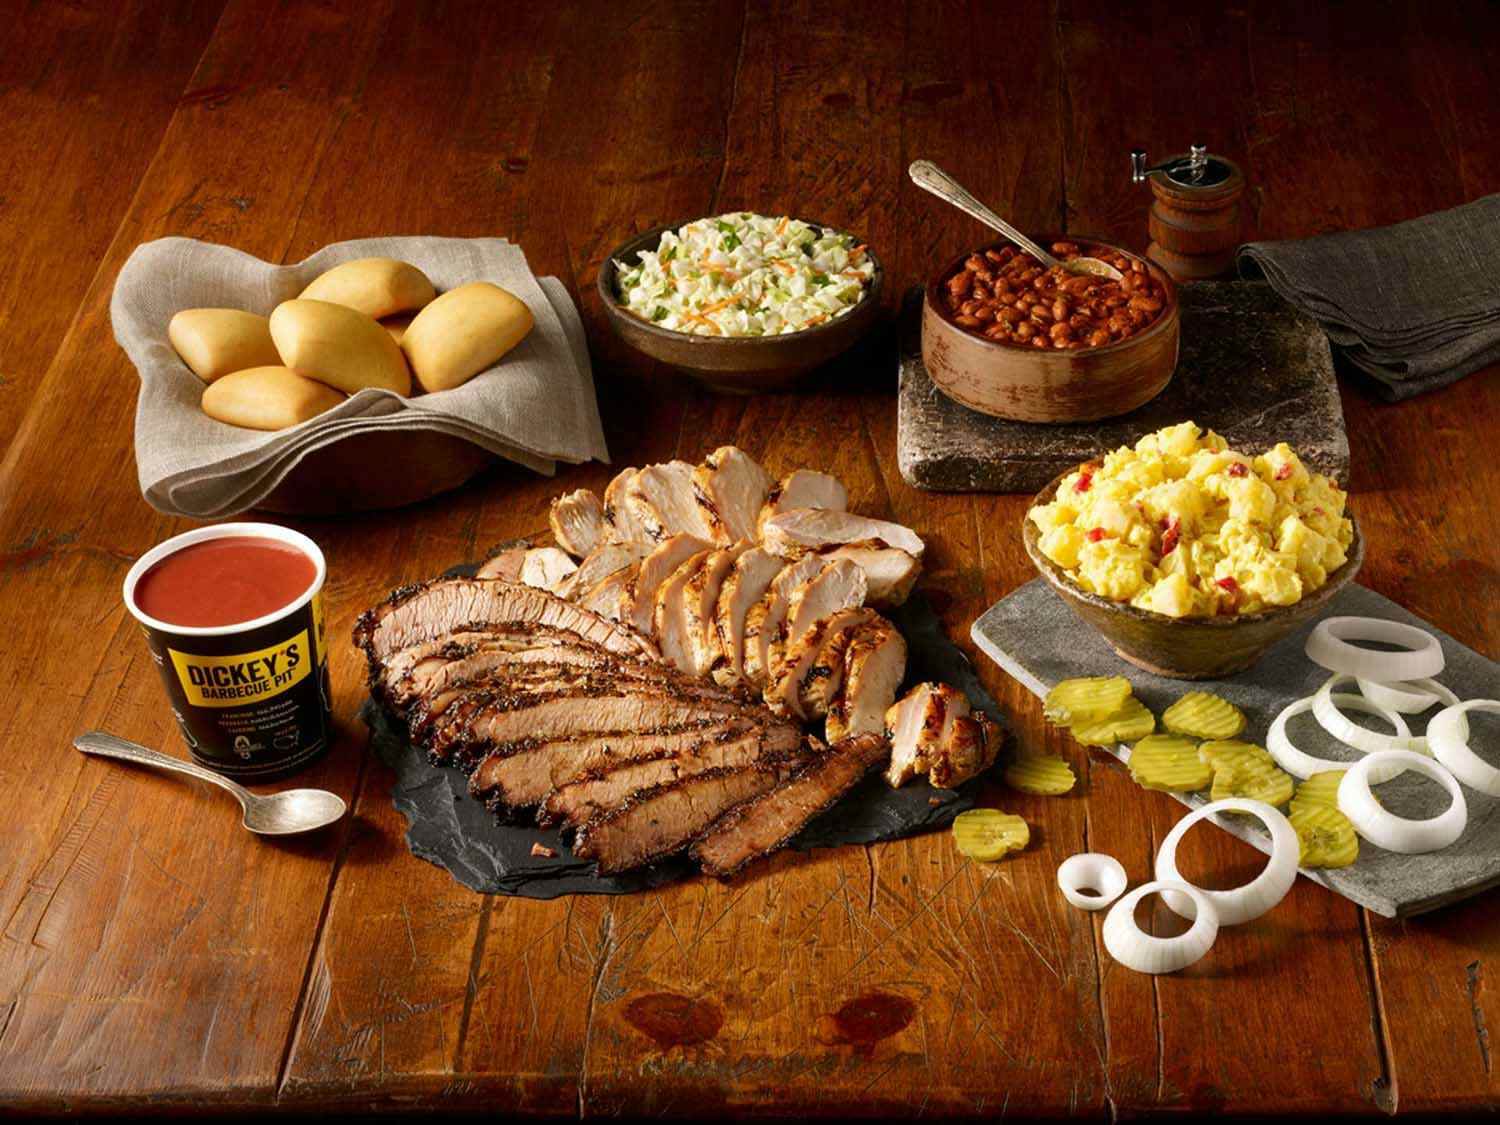 Dickey’s Barbecue Pit Coming Soon to Kapolei, Hawaii